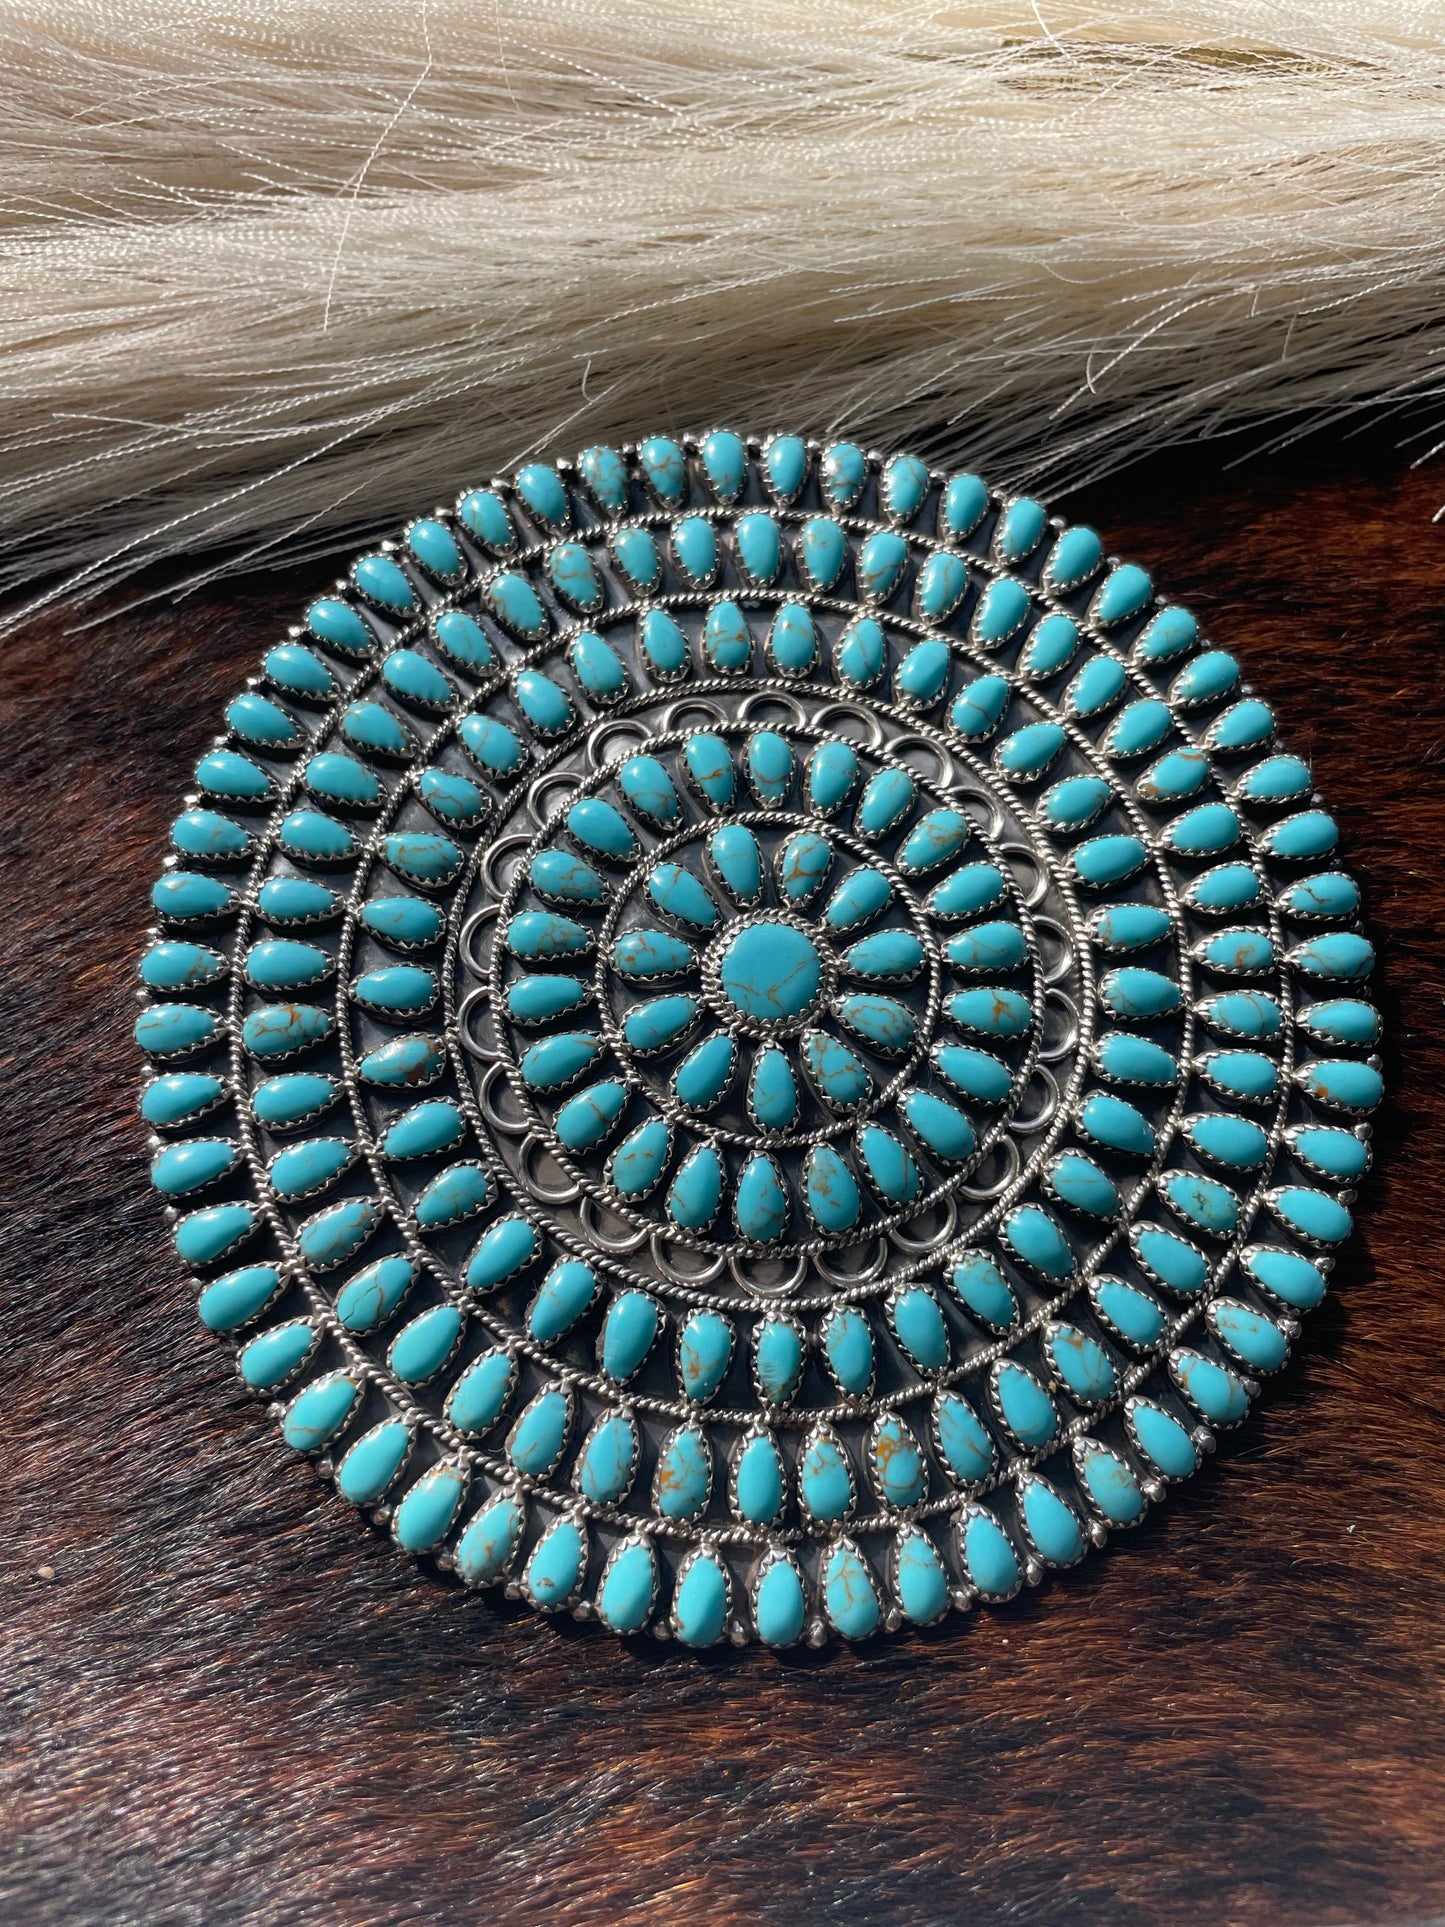 Vintage Navajo Turquoise And Sterling Silver Giant Circle Pendant Pin Signed